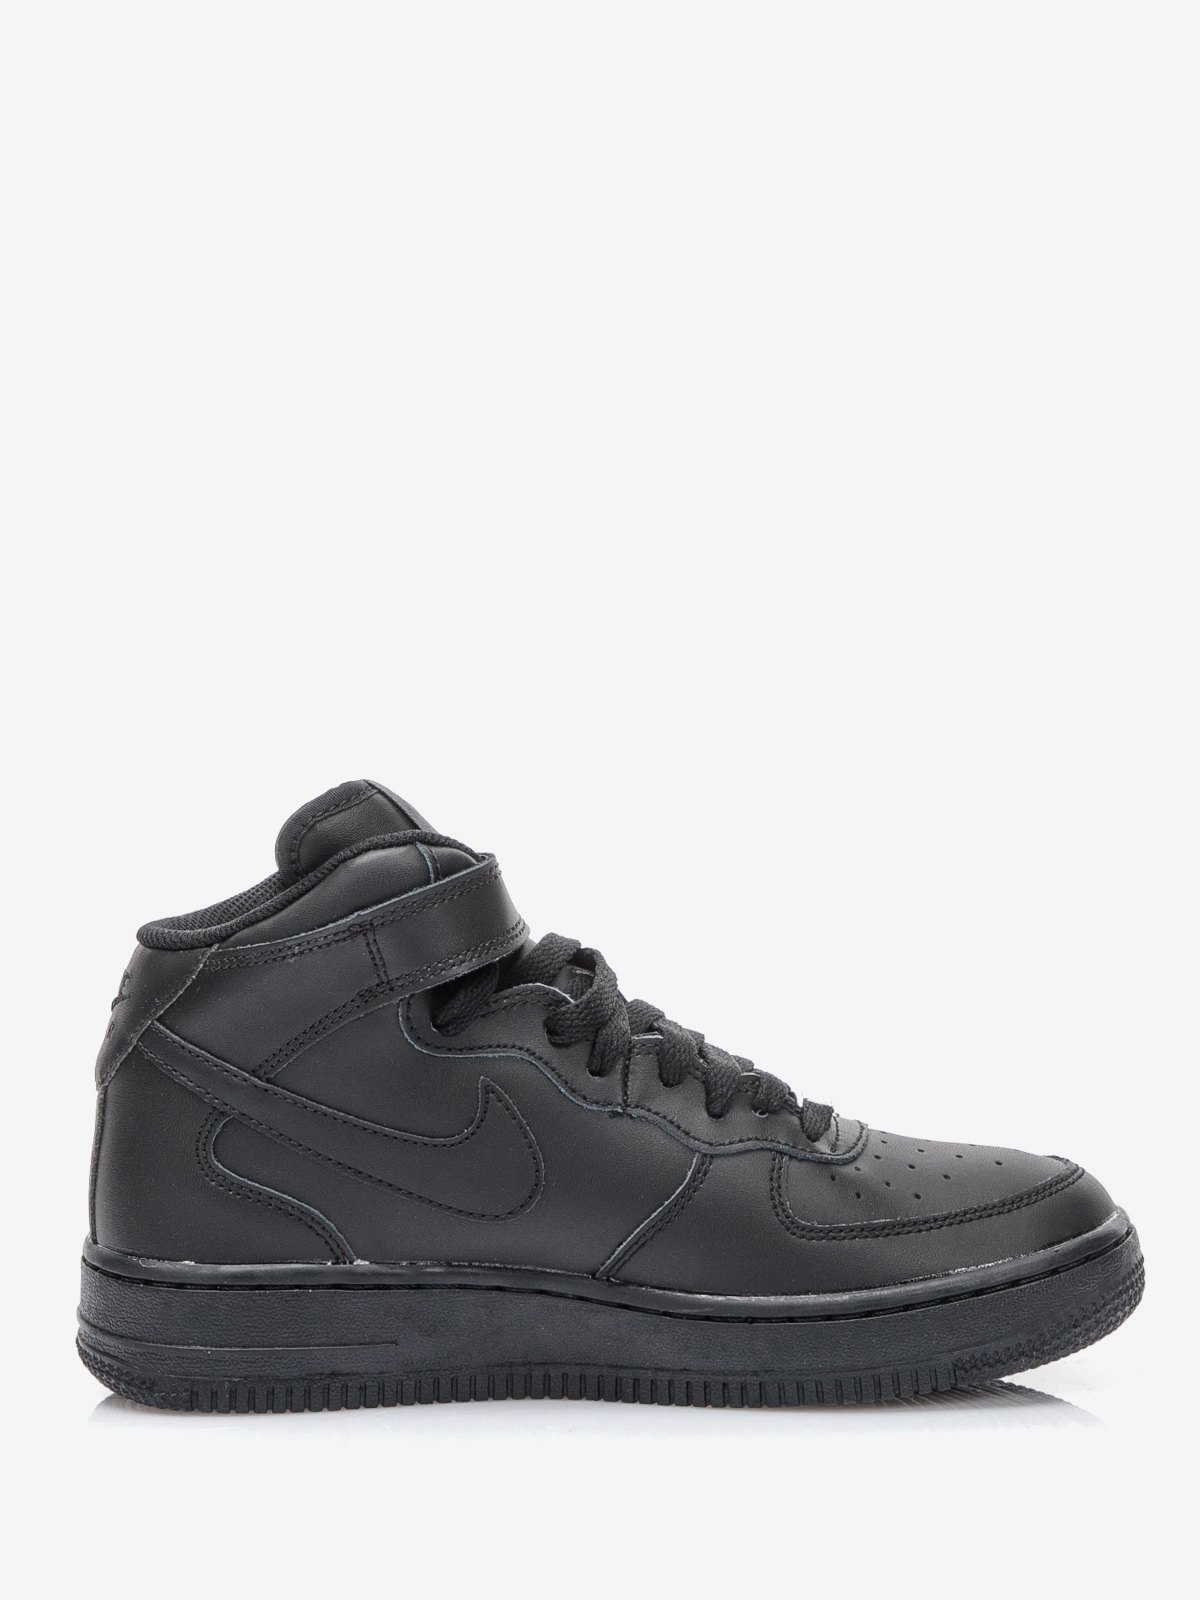 nike air force 1 mid gs